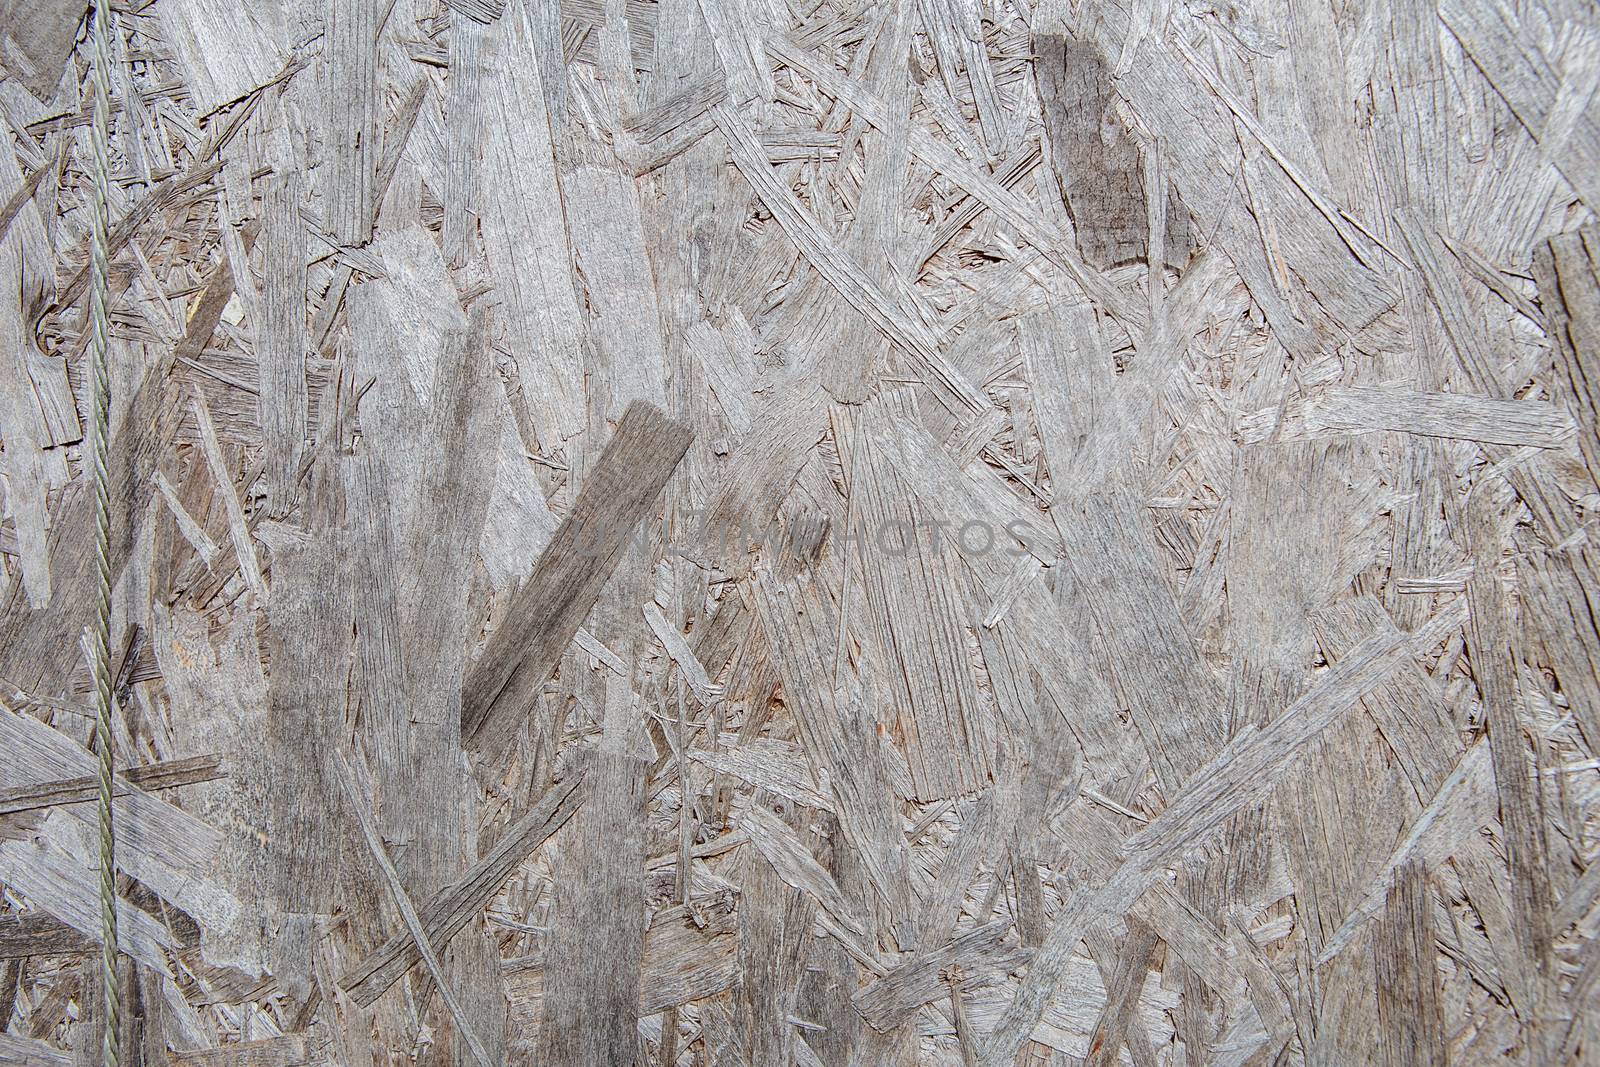 Pressed wooden panel background, seamless texture of oriented strand board - OSB